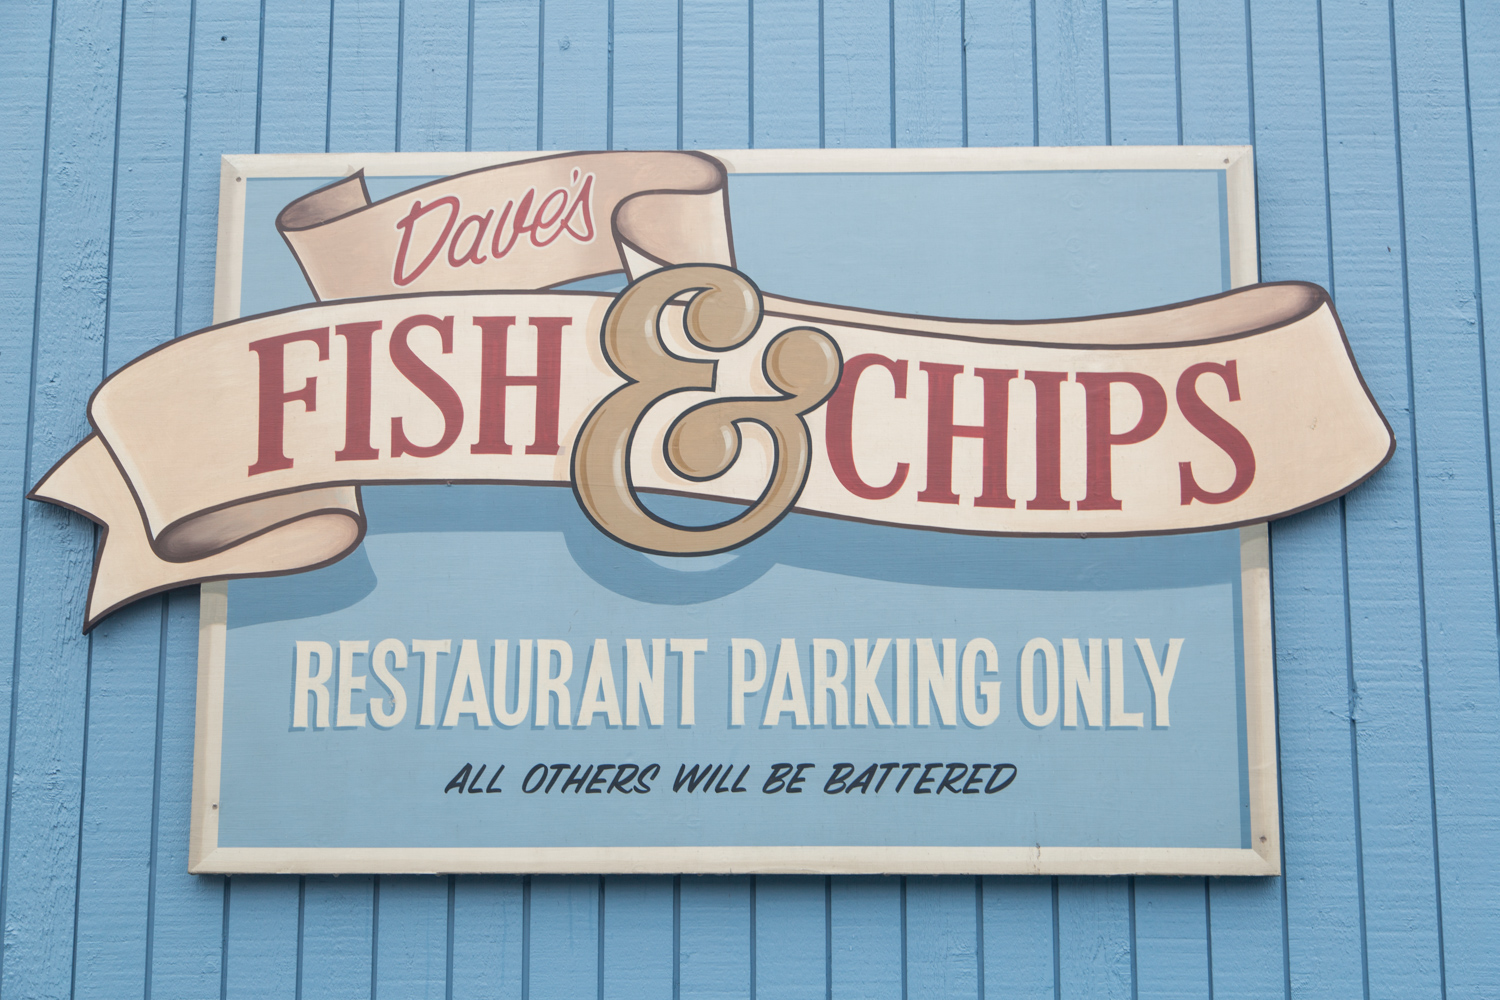 Dave's Fish and Chips